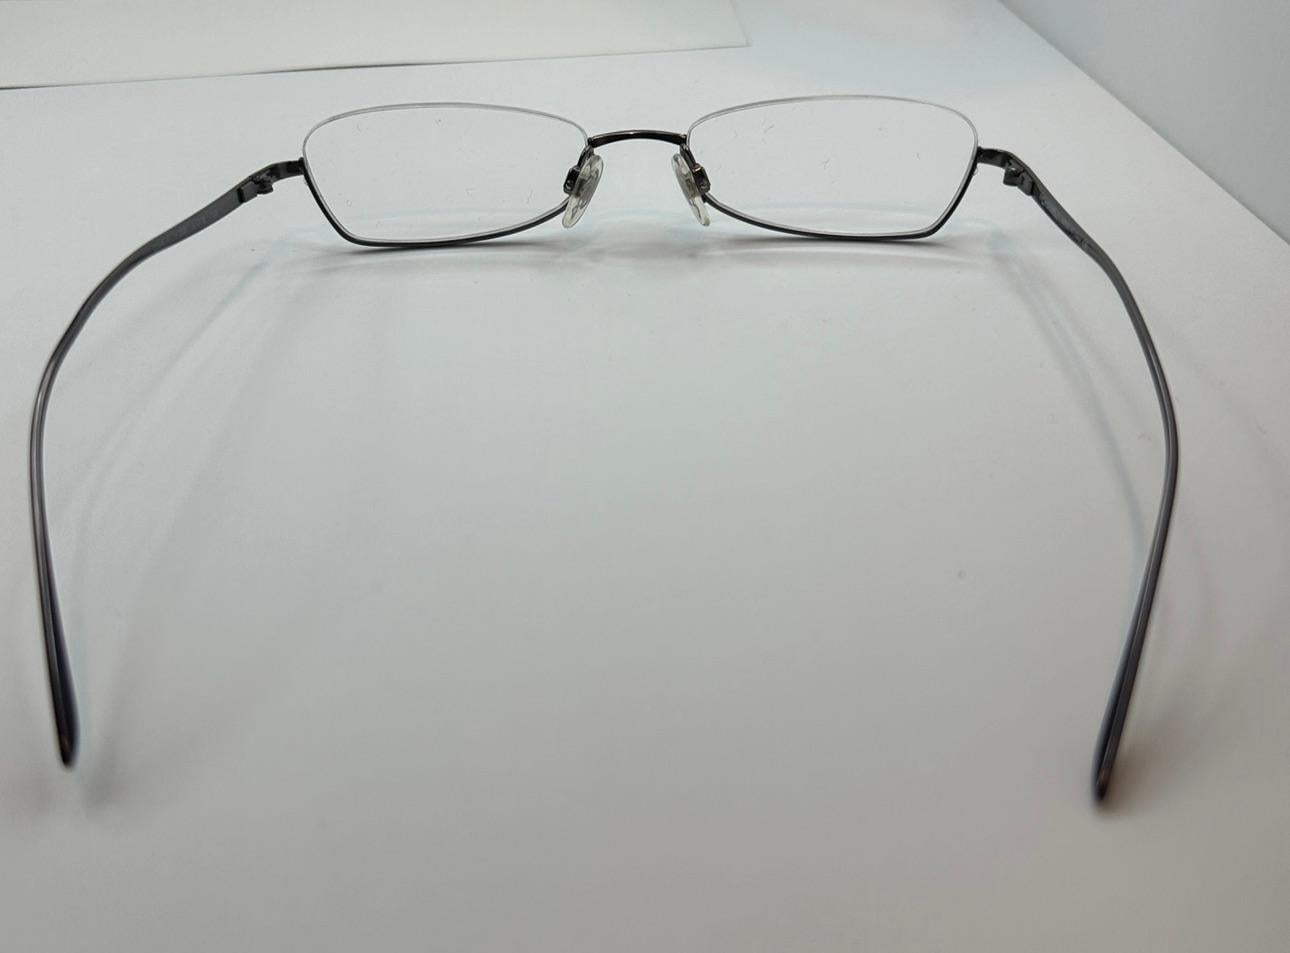 Chanel Lightweight Titanium Prescription Frames In Good Condition For Sale In New York, NY